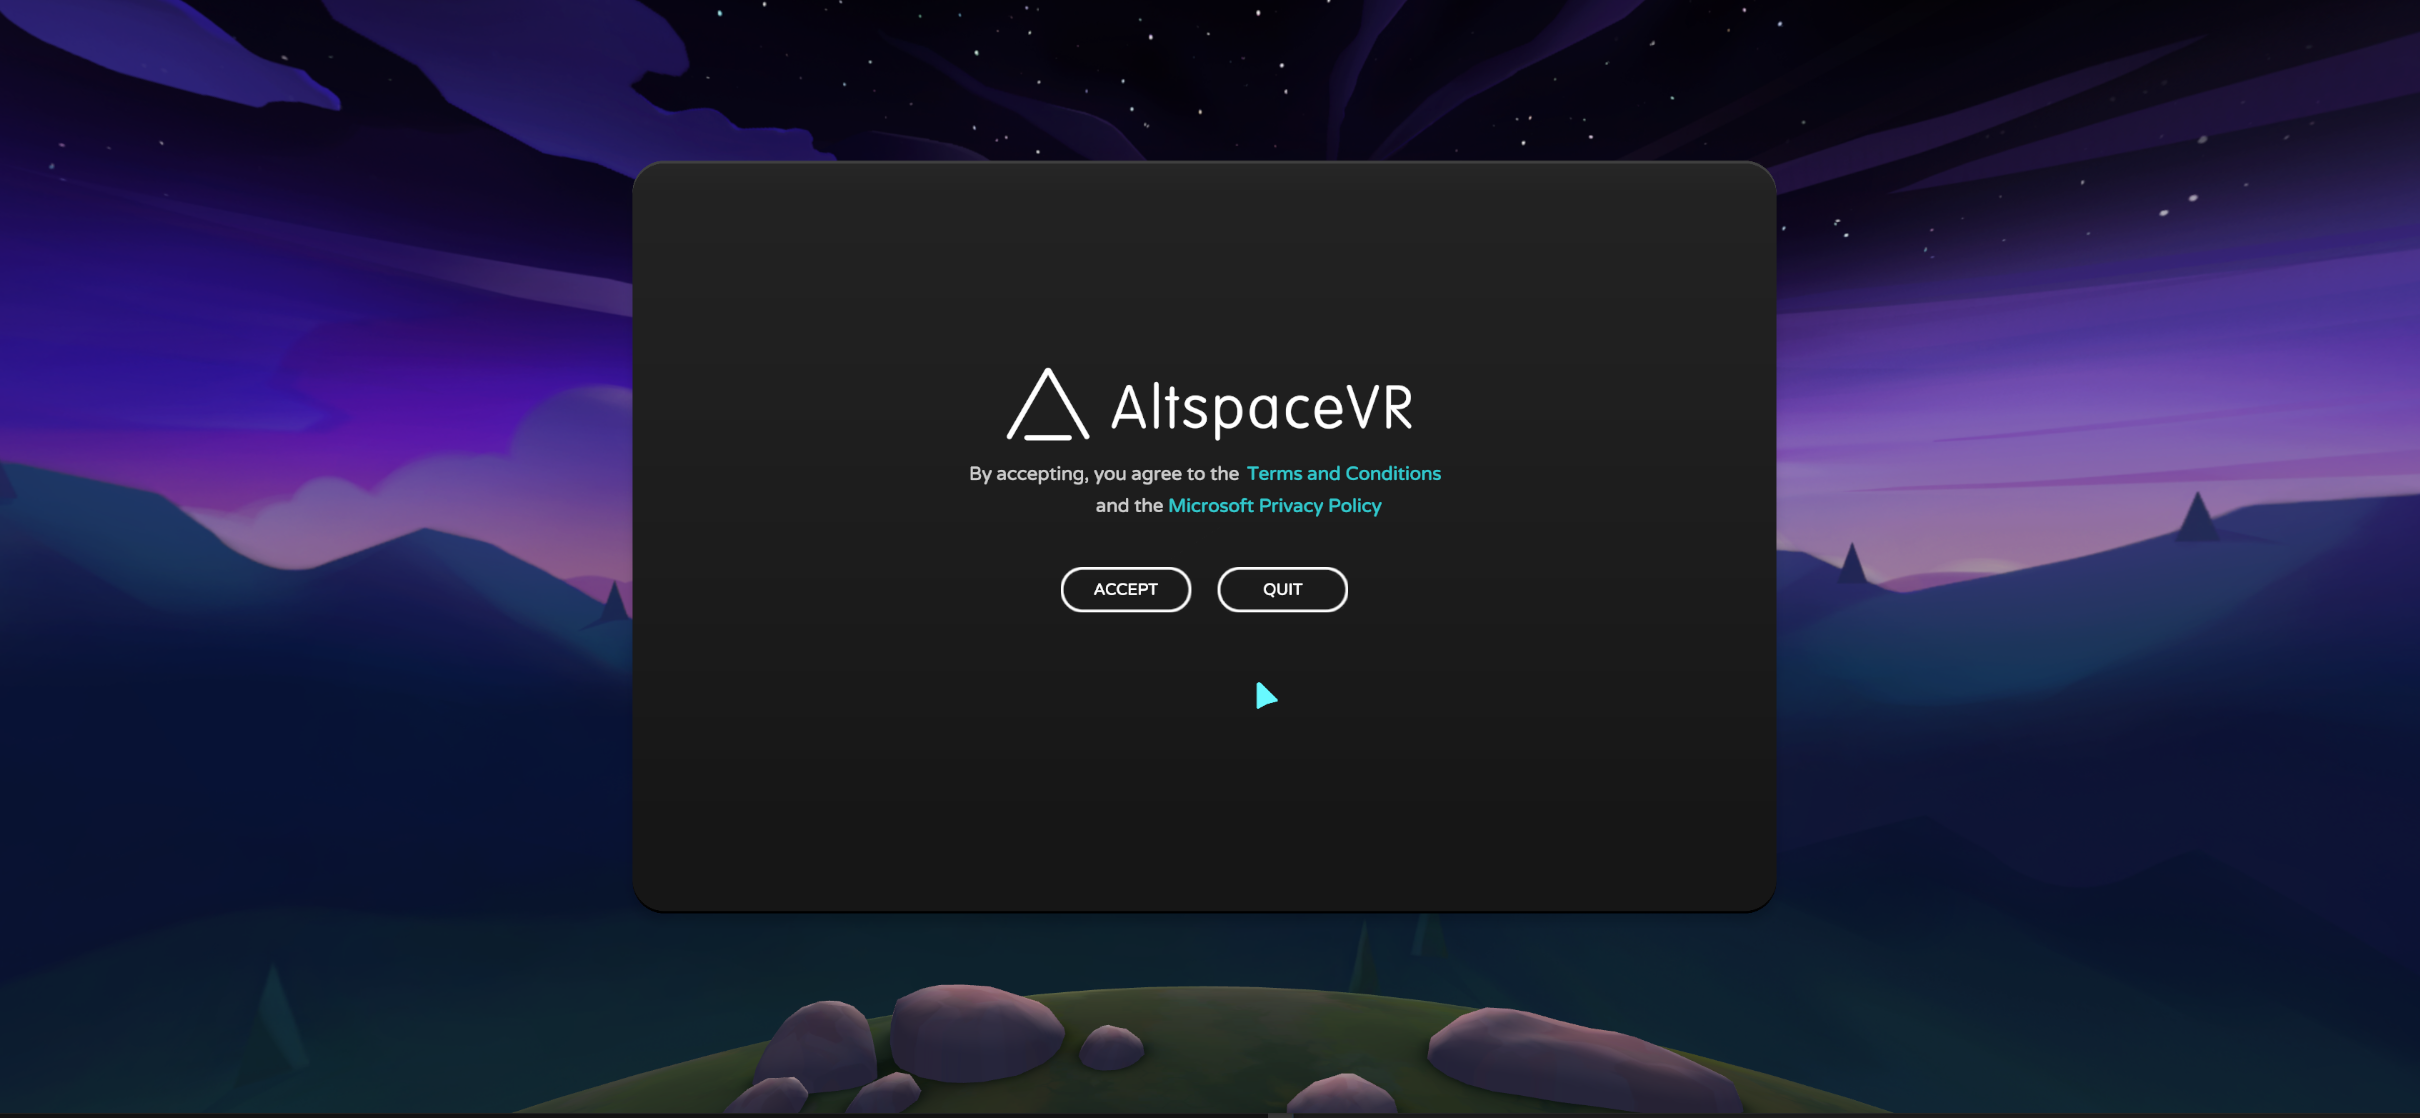 Sign in to the AltspaceVR app